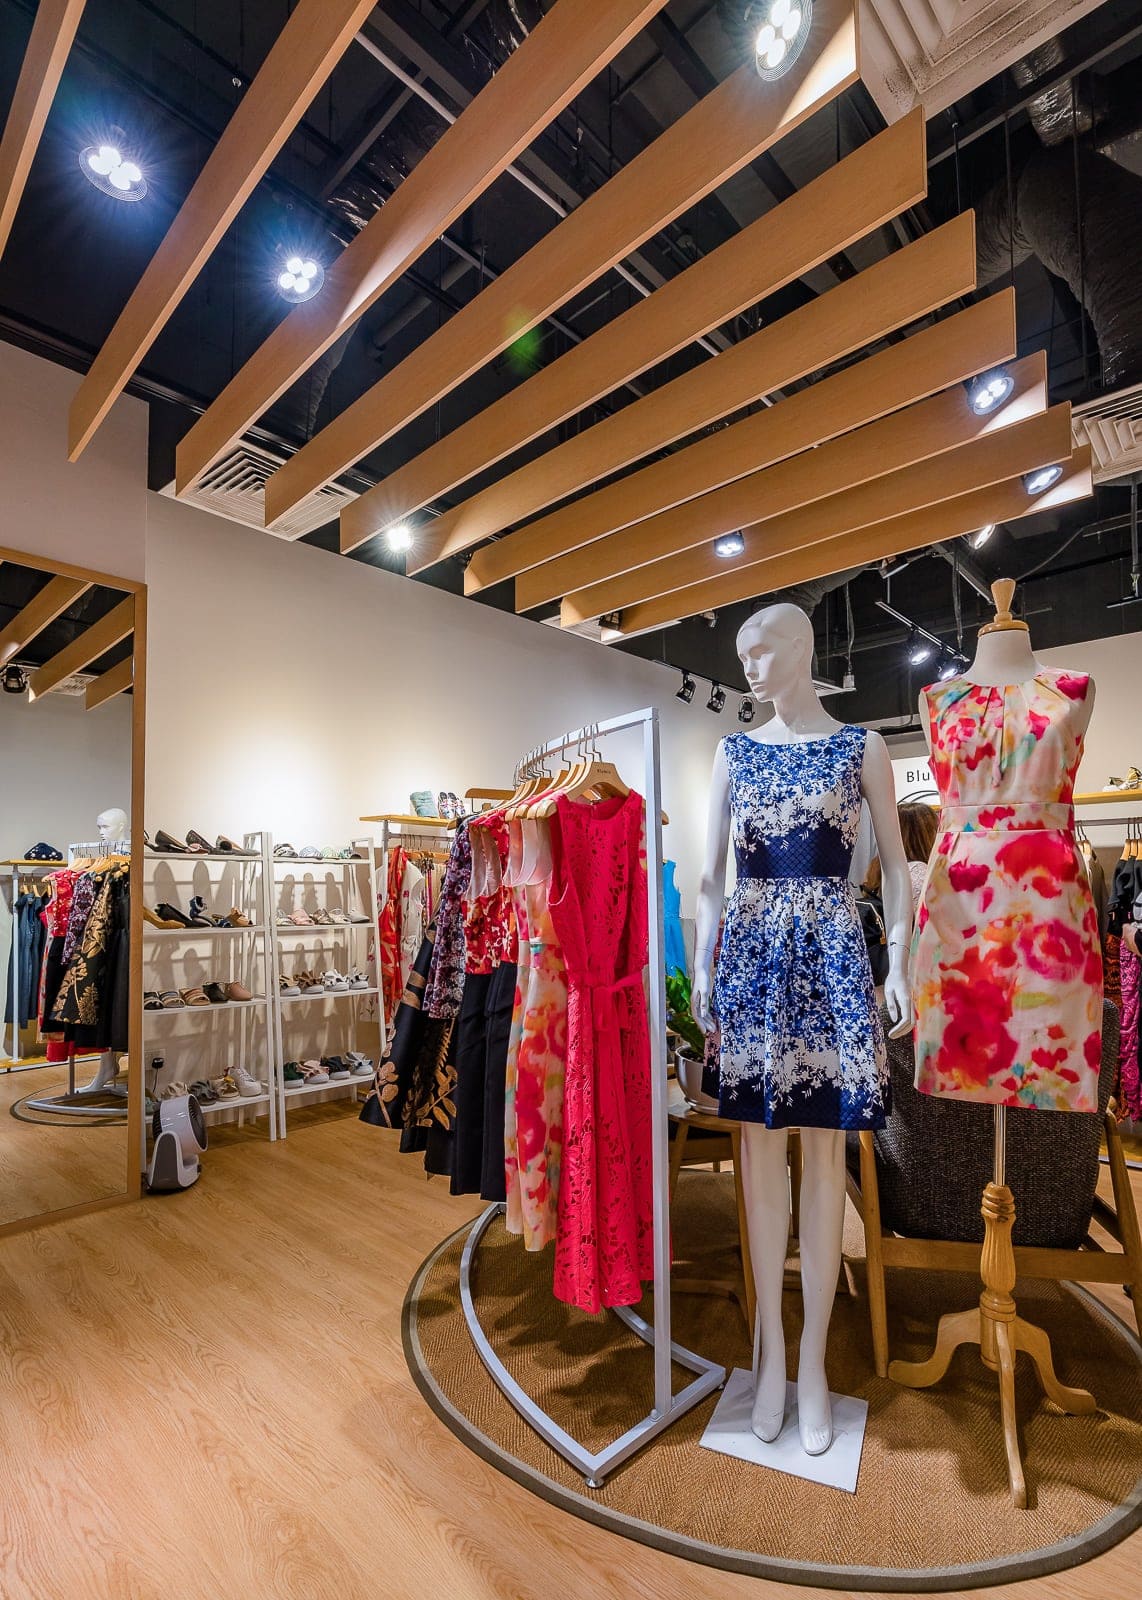 Women's Clothing Boutique: Elegant and Modern in Sensual Wood